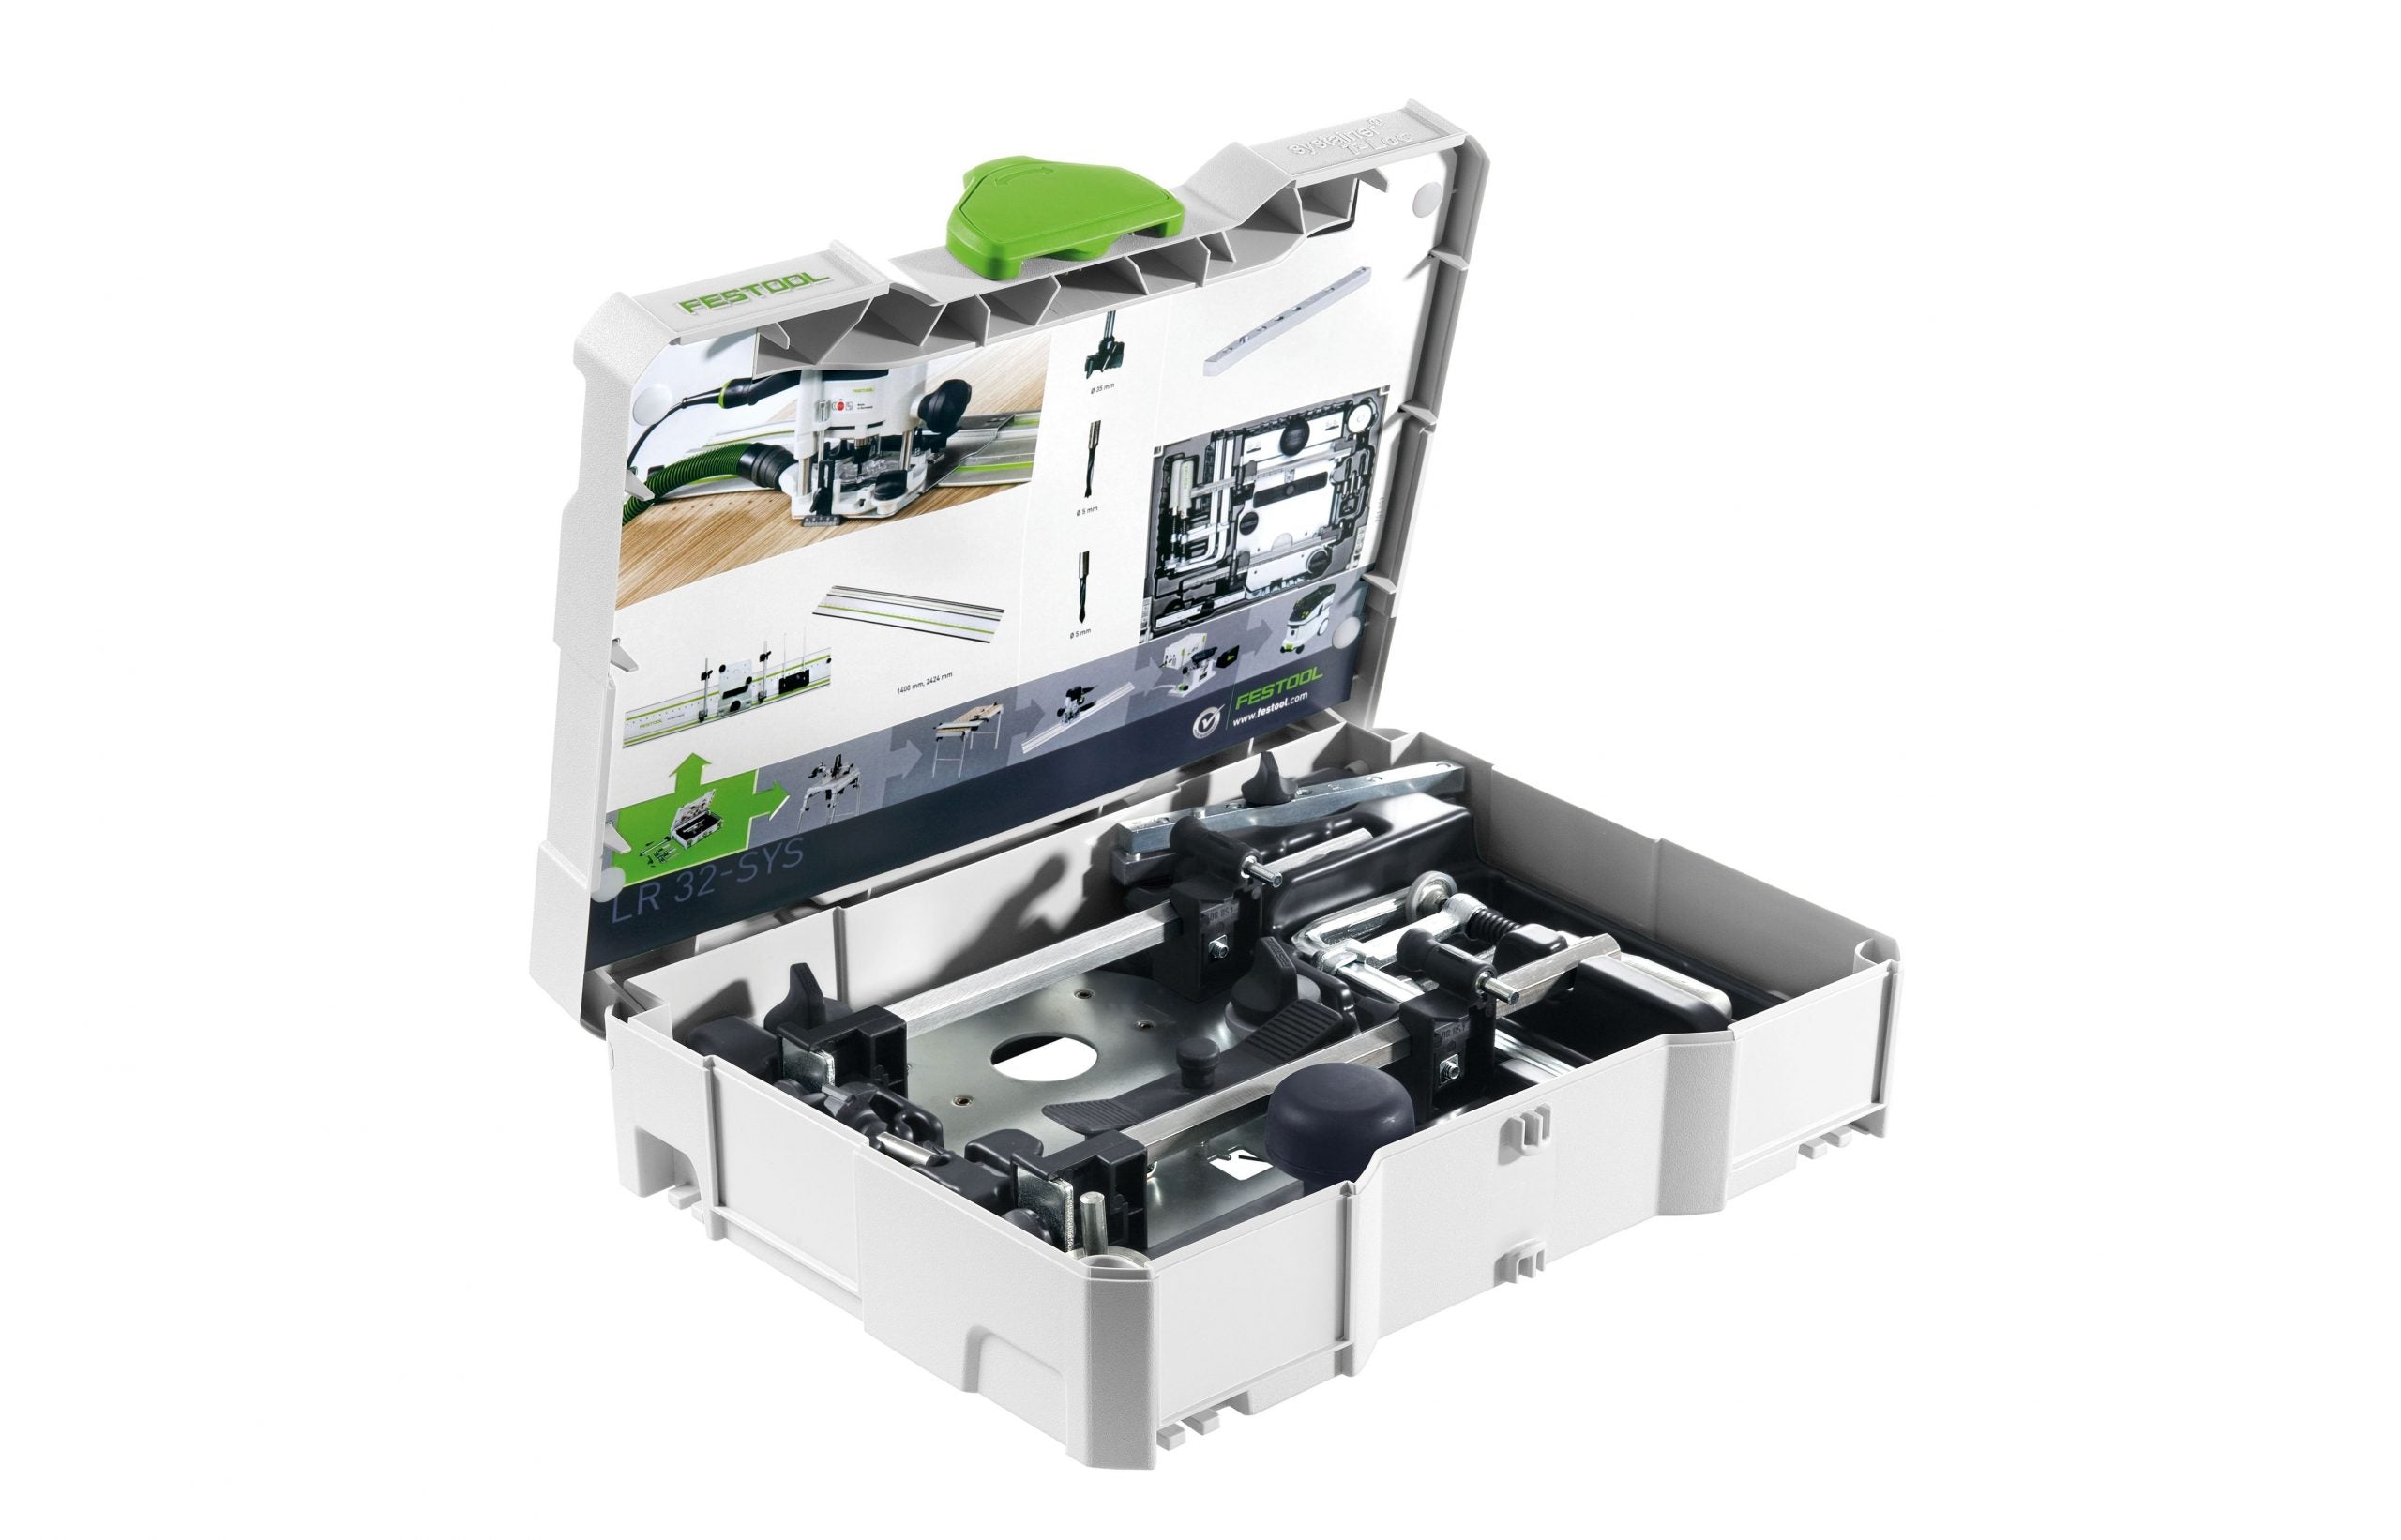 Hole Drilling System Systainer Set for LR 32 System 584100 by Festool